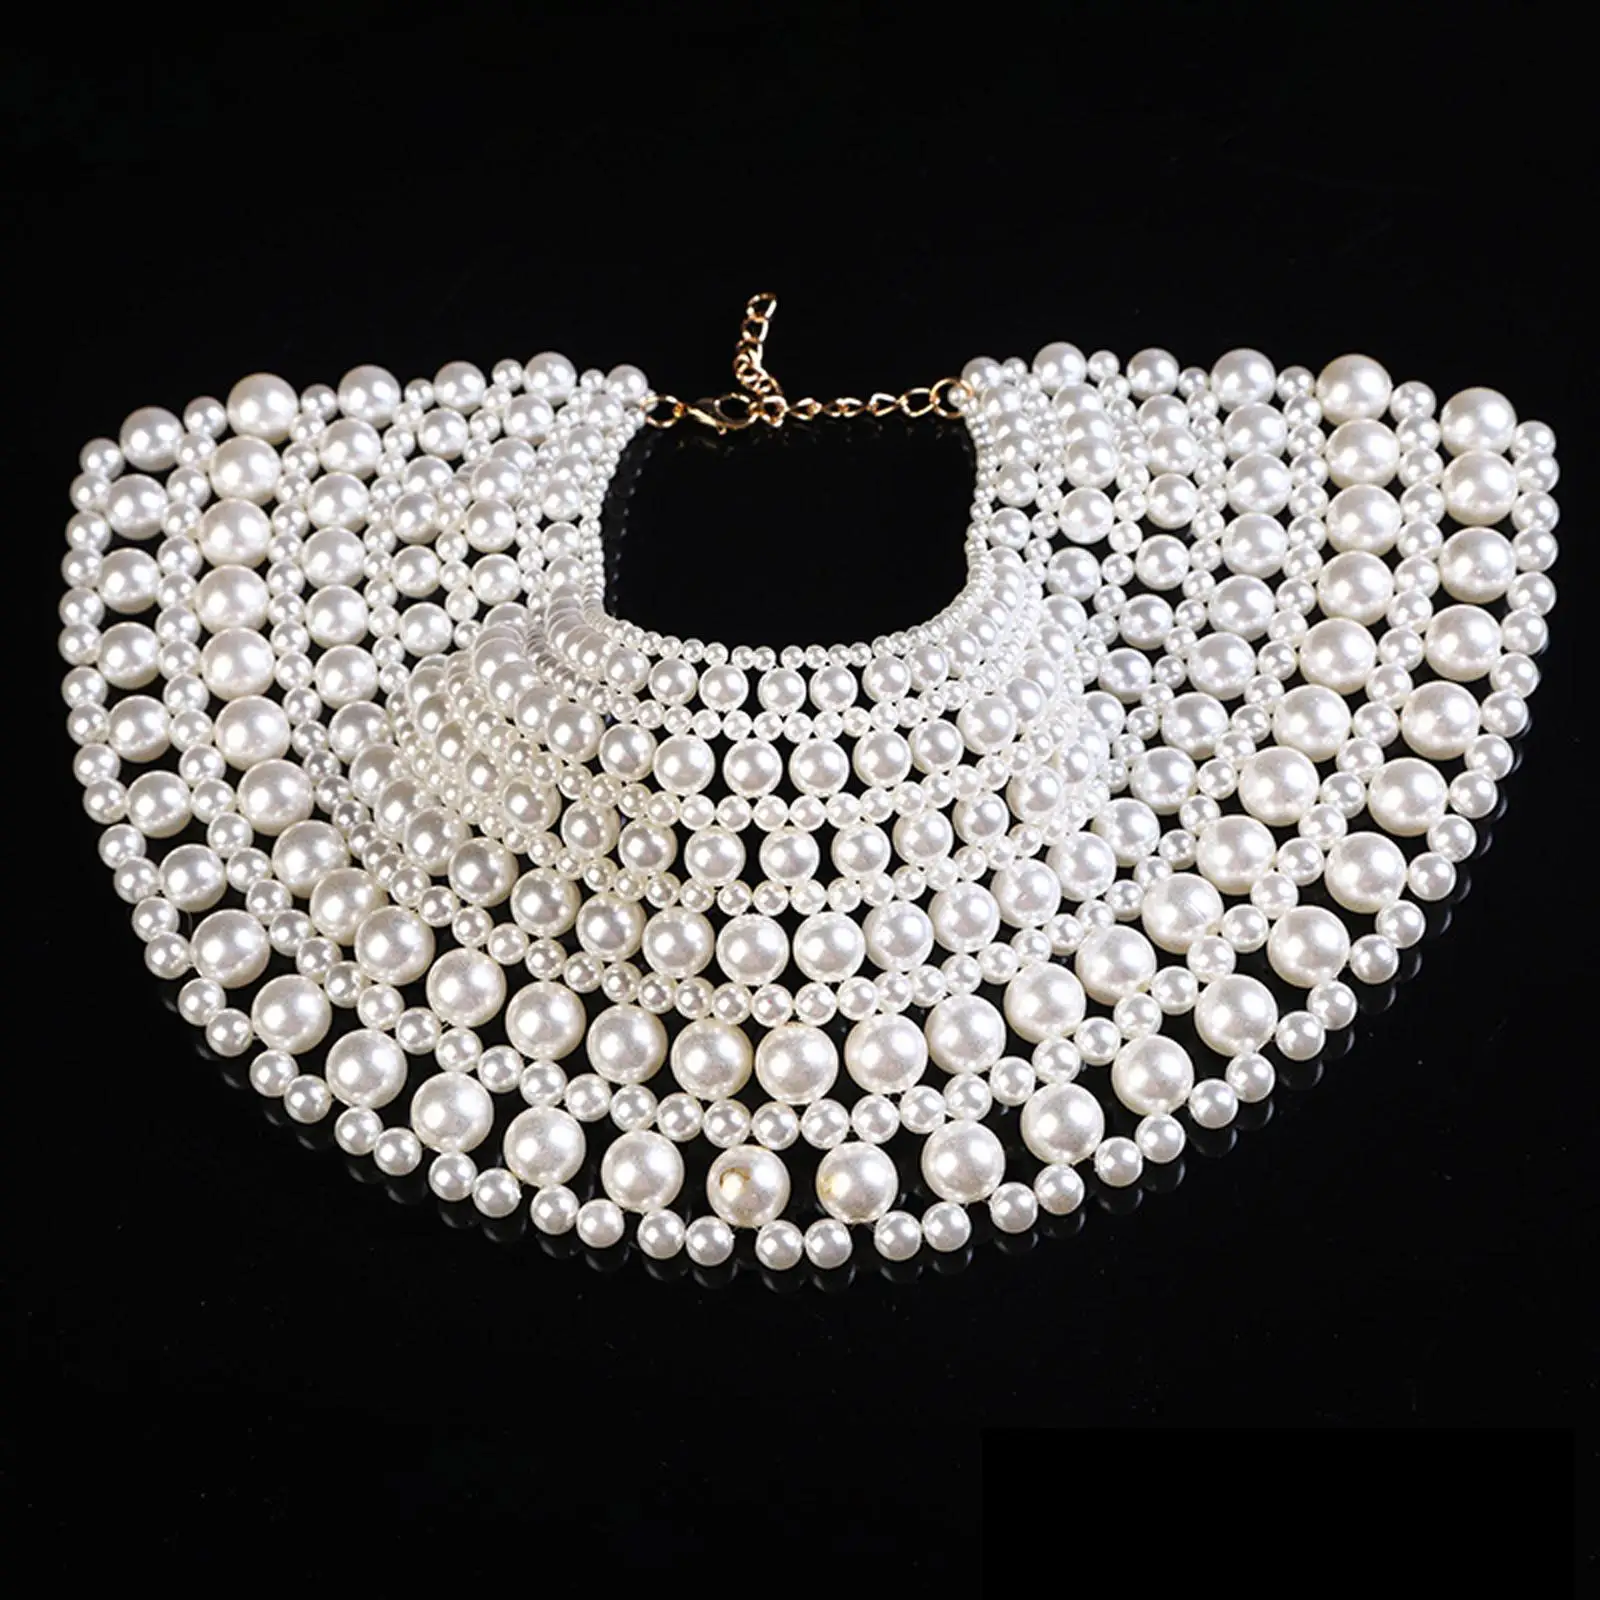 Imitation Pearl Necklace, Faux Pearl Body Chain DIY Craft Bib Choker Necklace Multi Strands Choker for Wedding Mom/Wife/ Brides